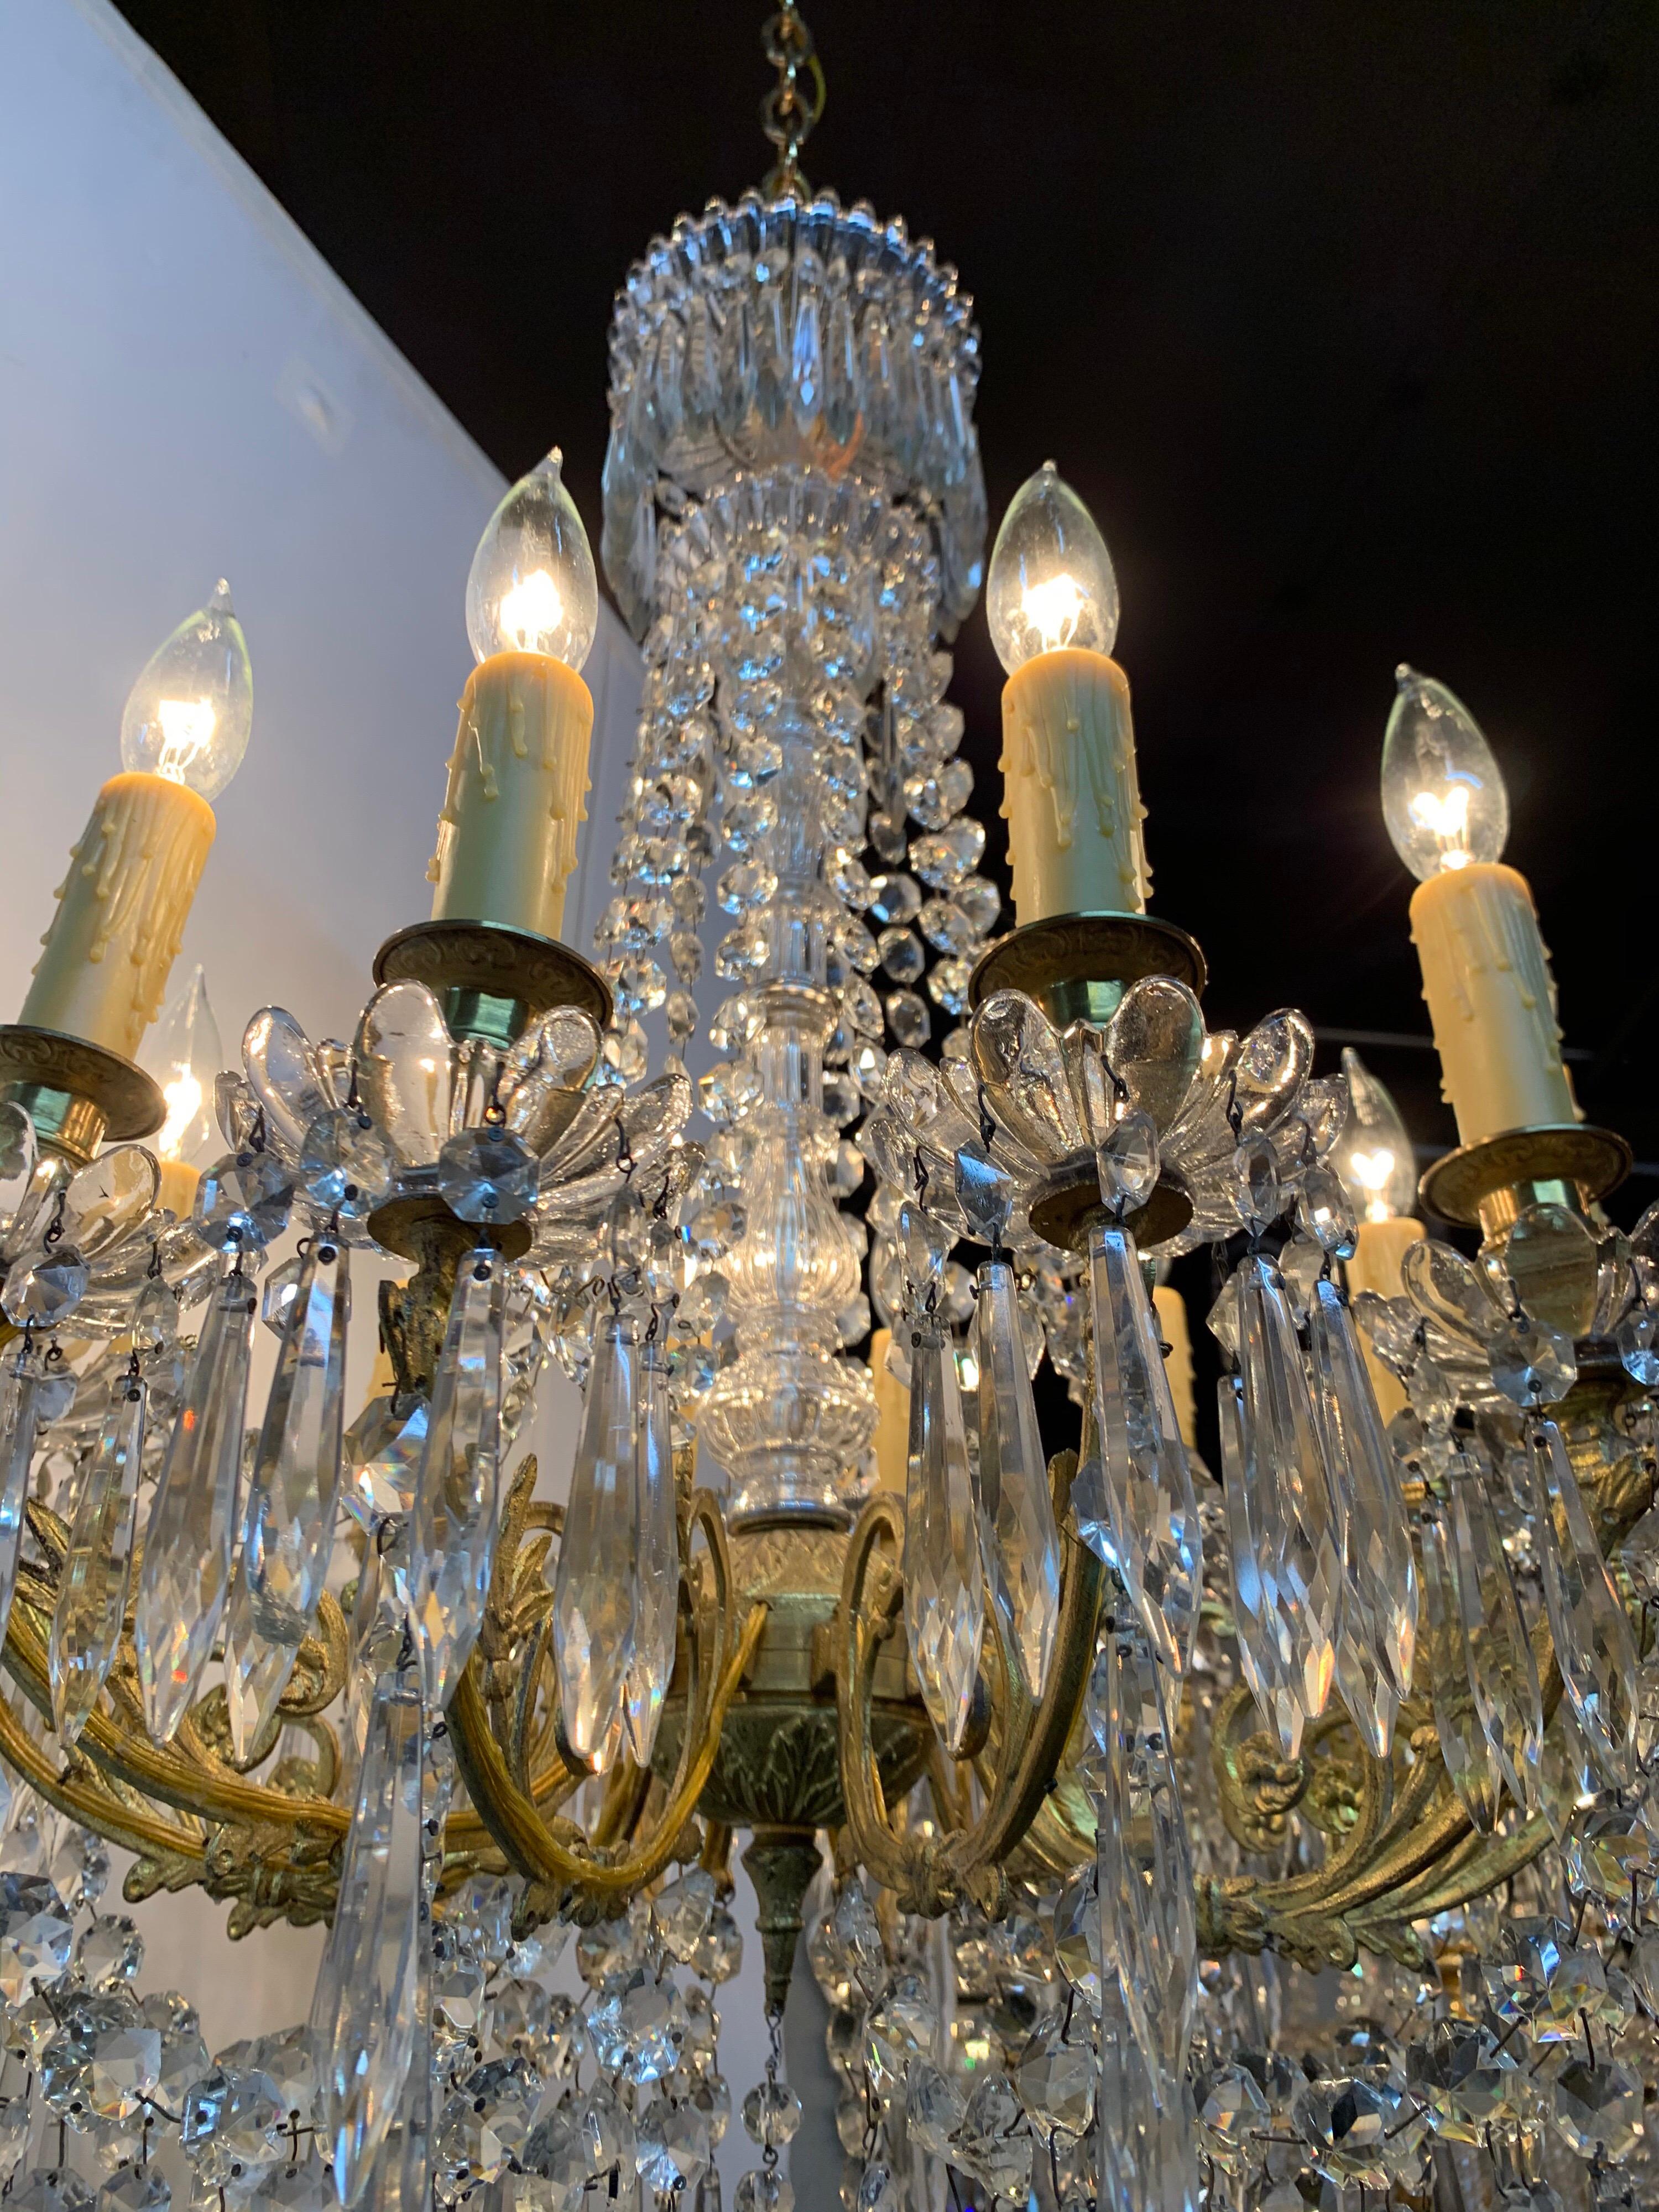 Very fine 12 light French gilt bronze chandelier dripping with gorgeous baccarat crystals. Makes a very impressive statement!